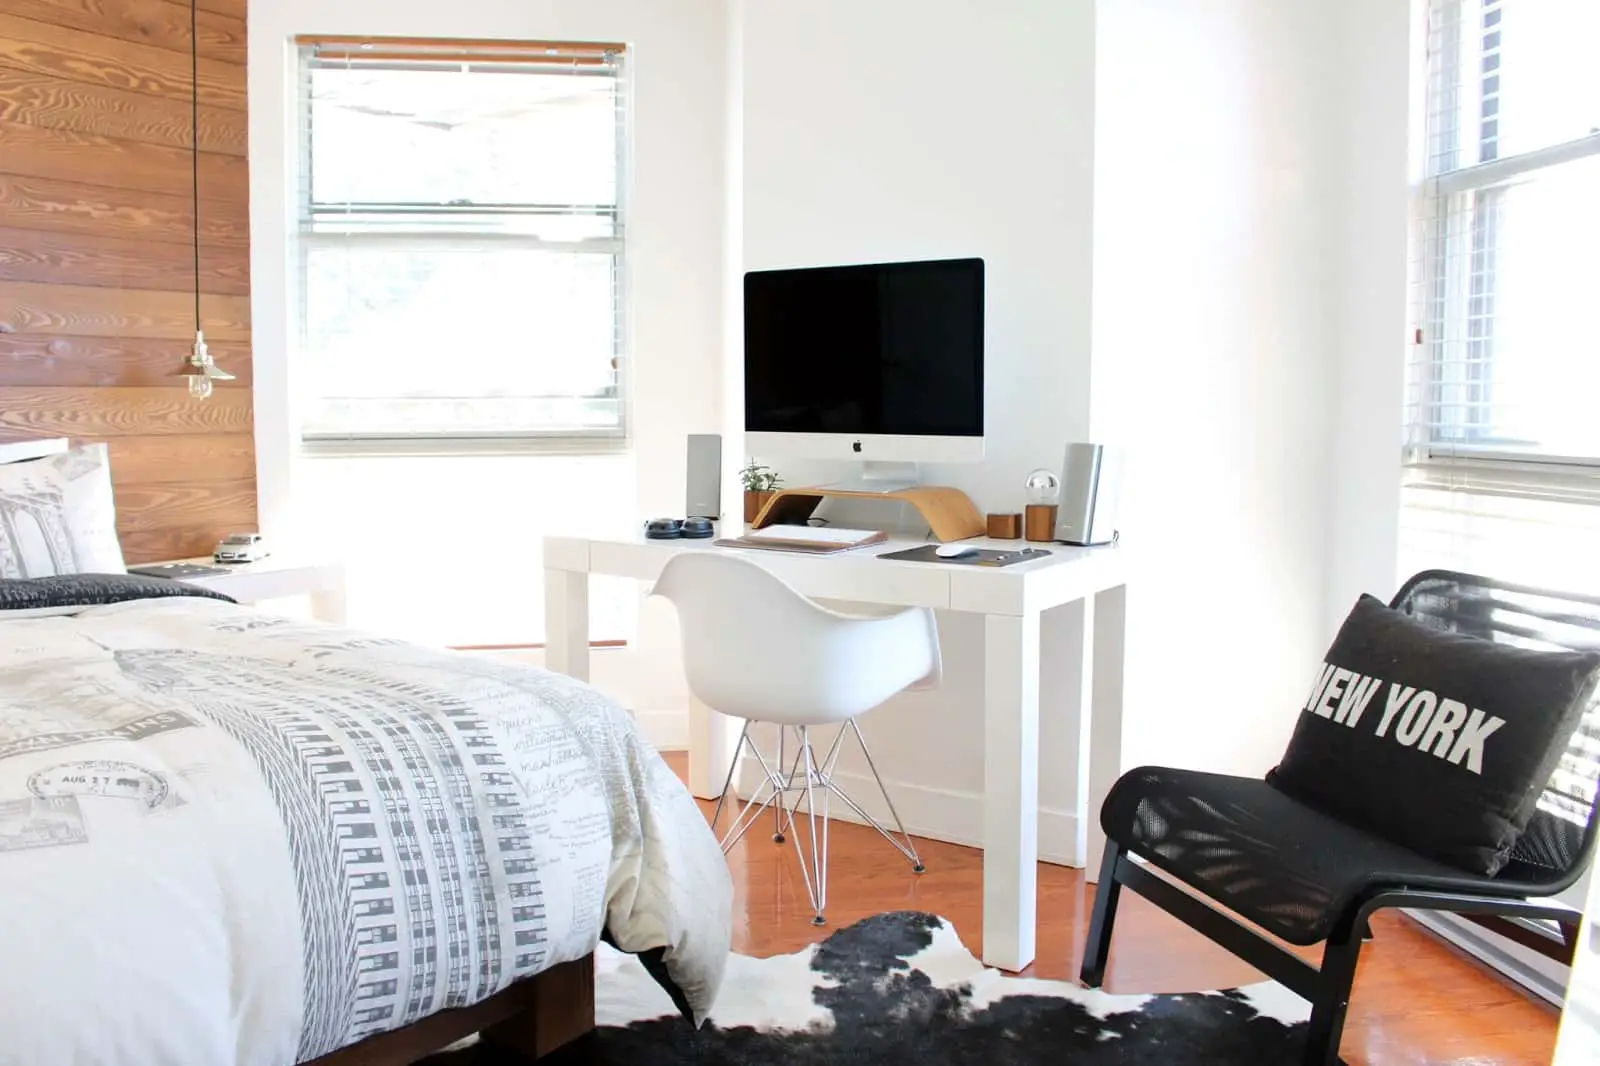 The Bedroom Home Office: How To Make It Work